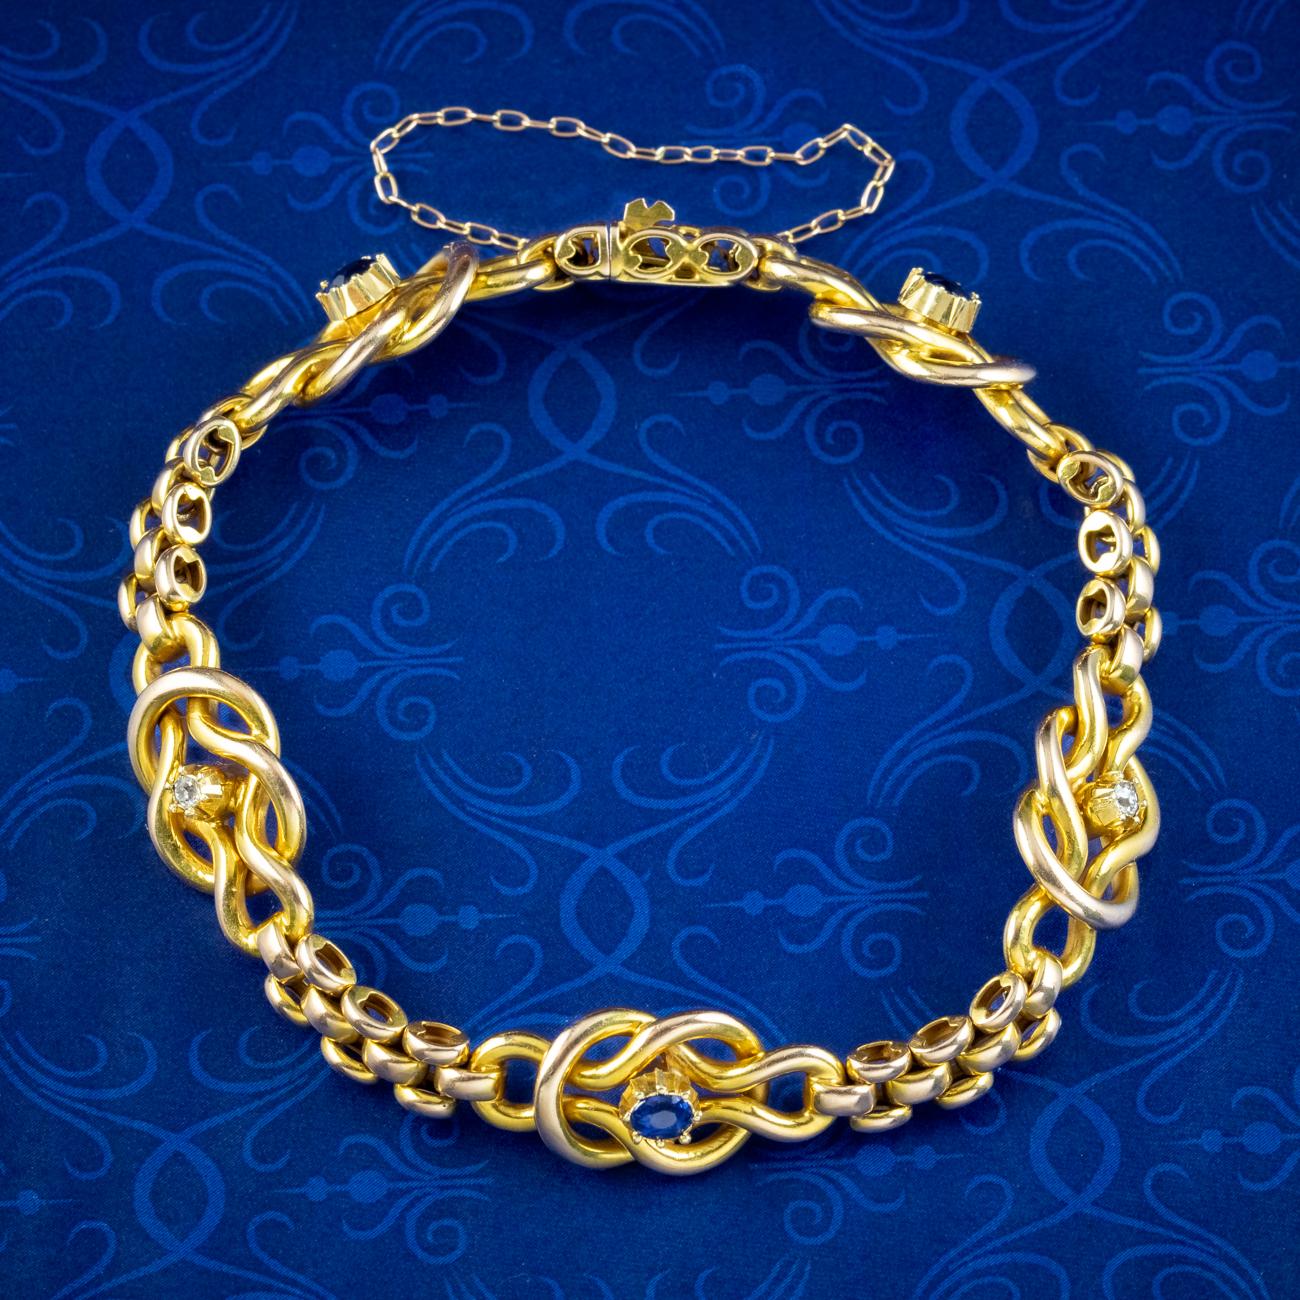 A fabulous antique Victorian love knot bracelet made up of solid 15ct gold brick links and five interwoven love knots each crowned with a blue sapphire or twinkling old mine cut diamond in the centre.

A love knot has long been a symbol of love,